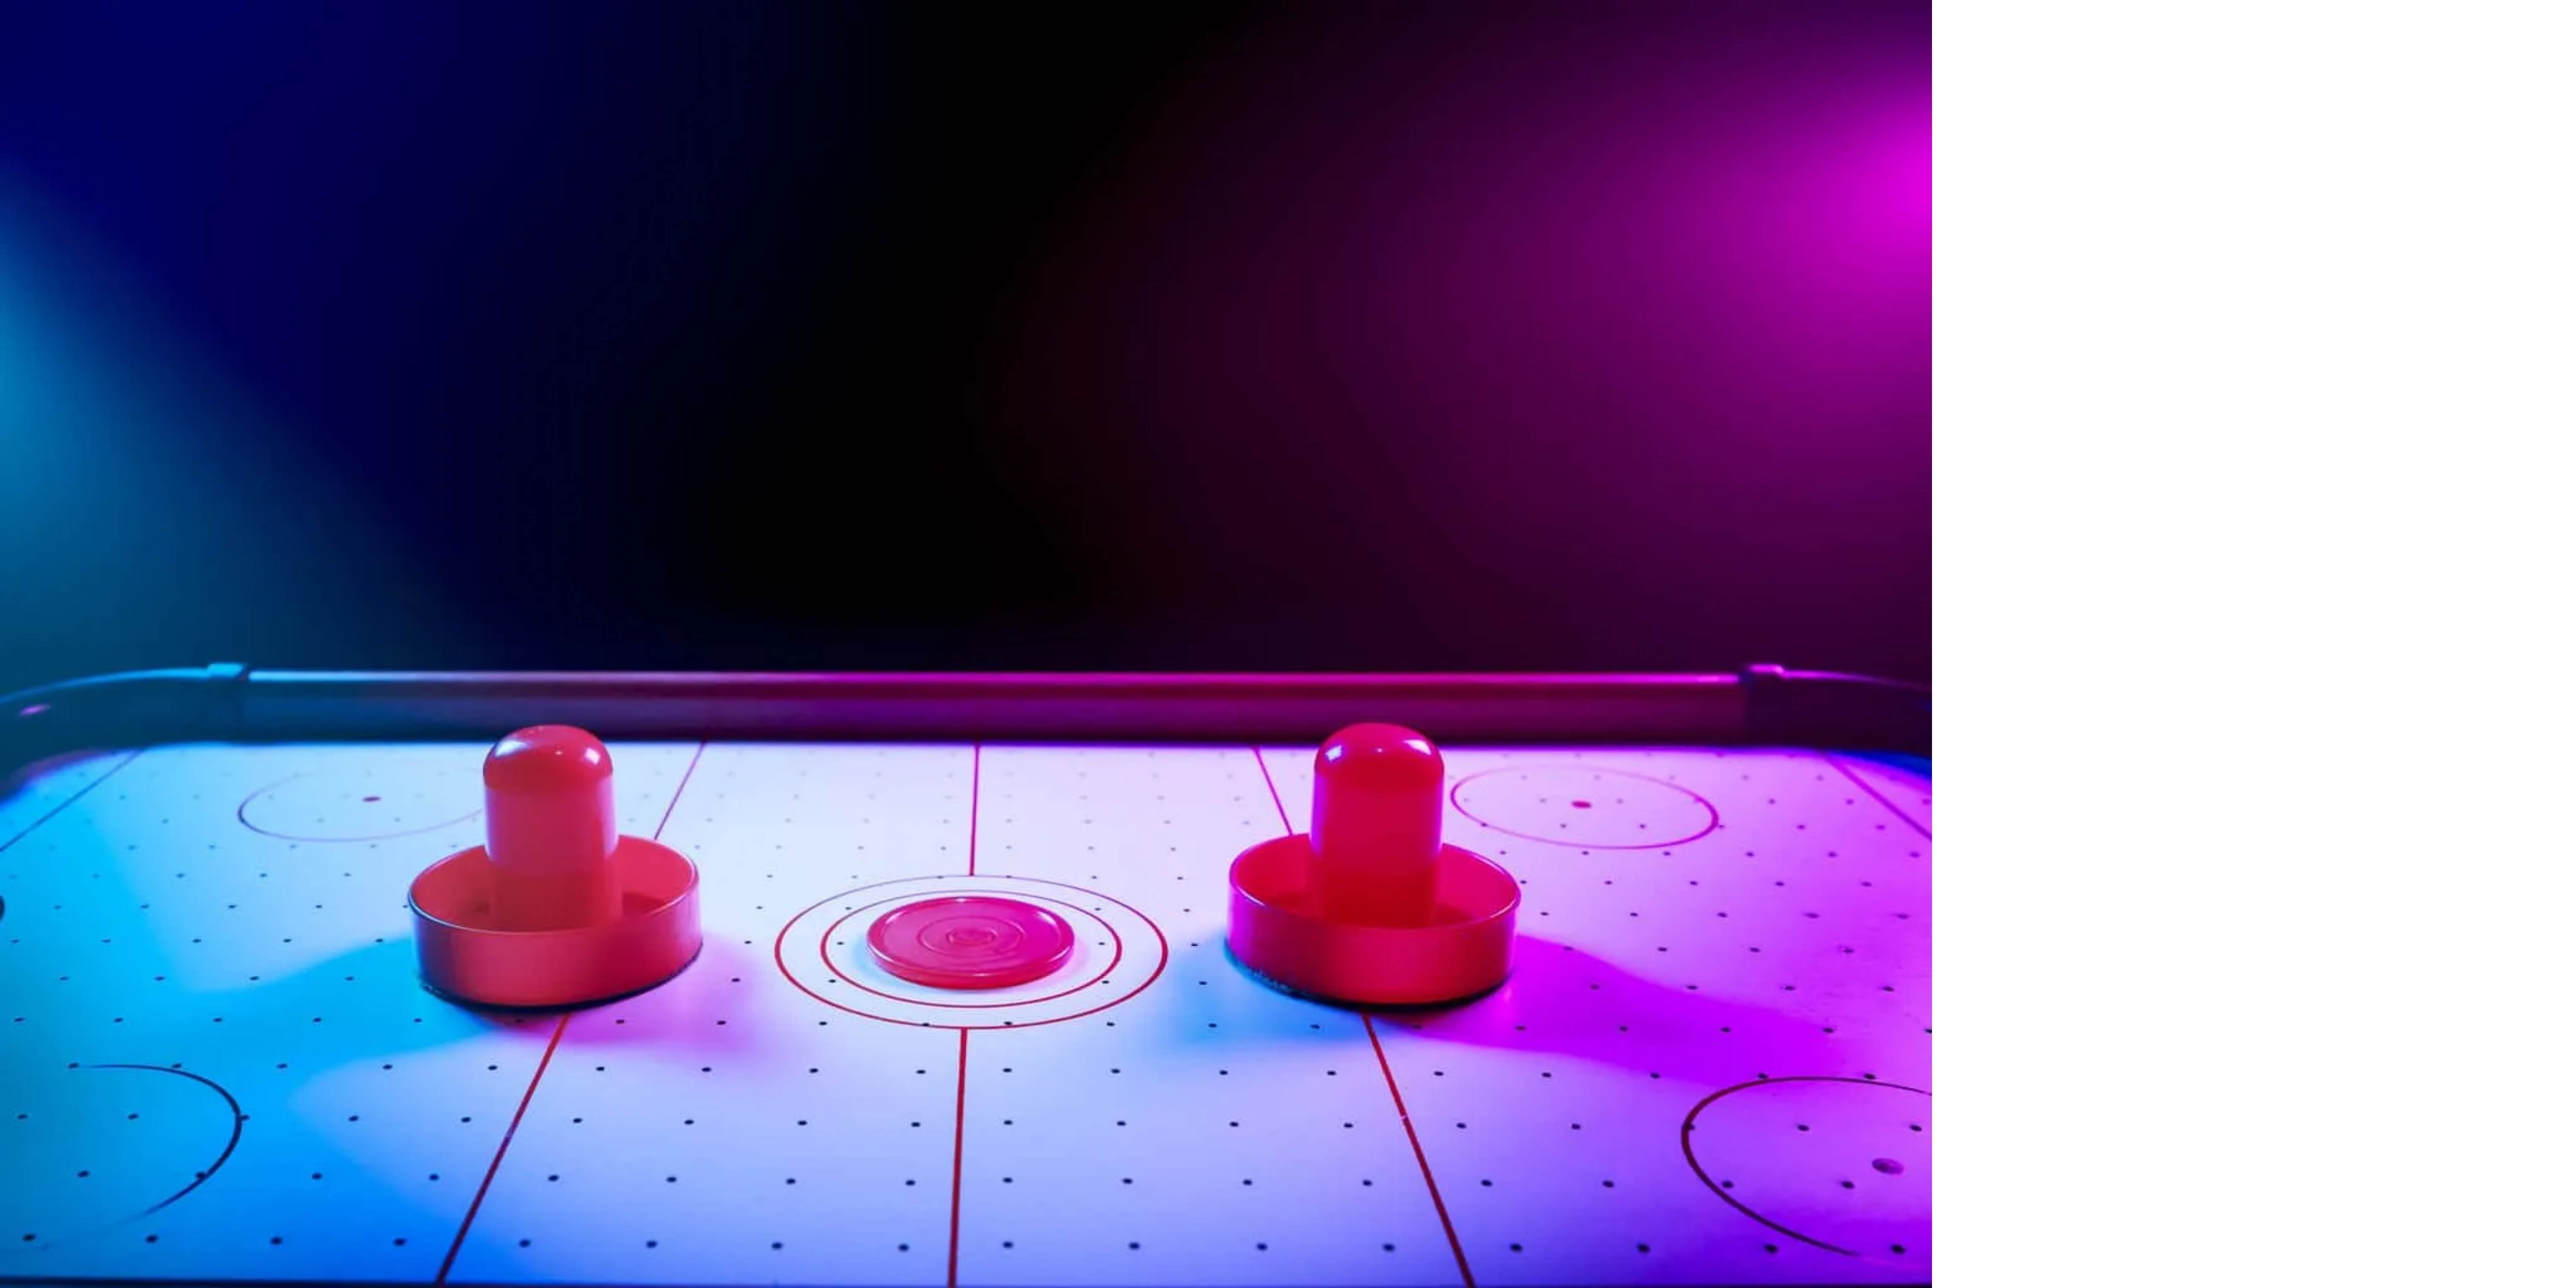 Sportcraft air hockey table with colorful lights that make you feel like you're in an arcade